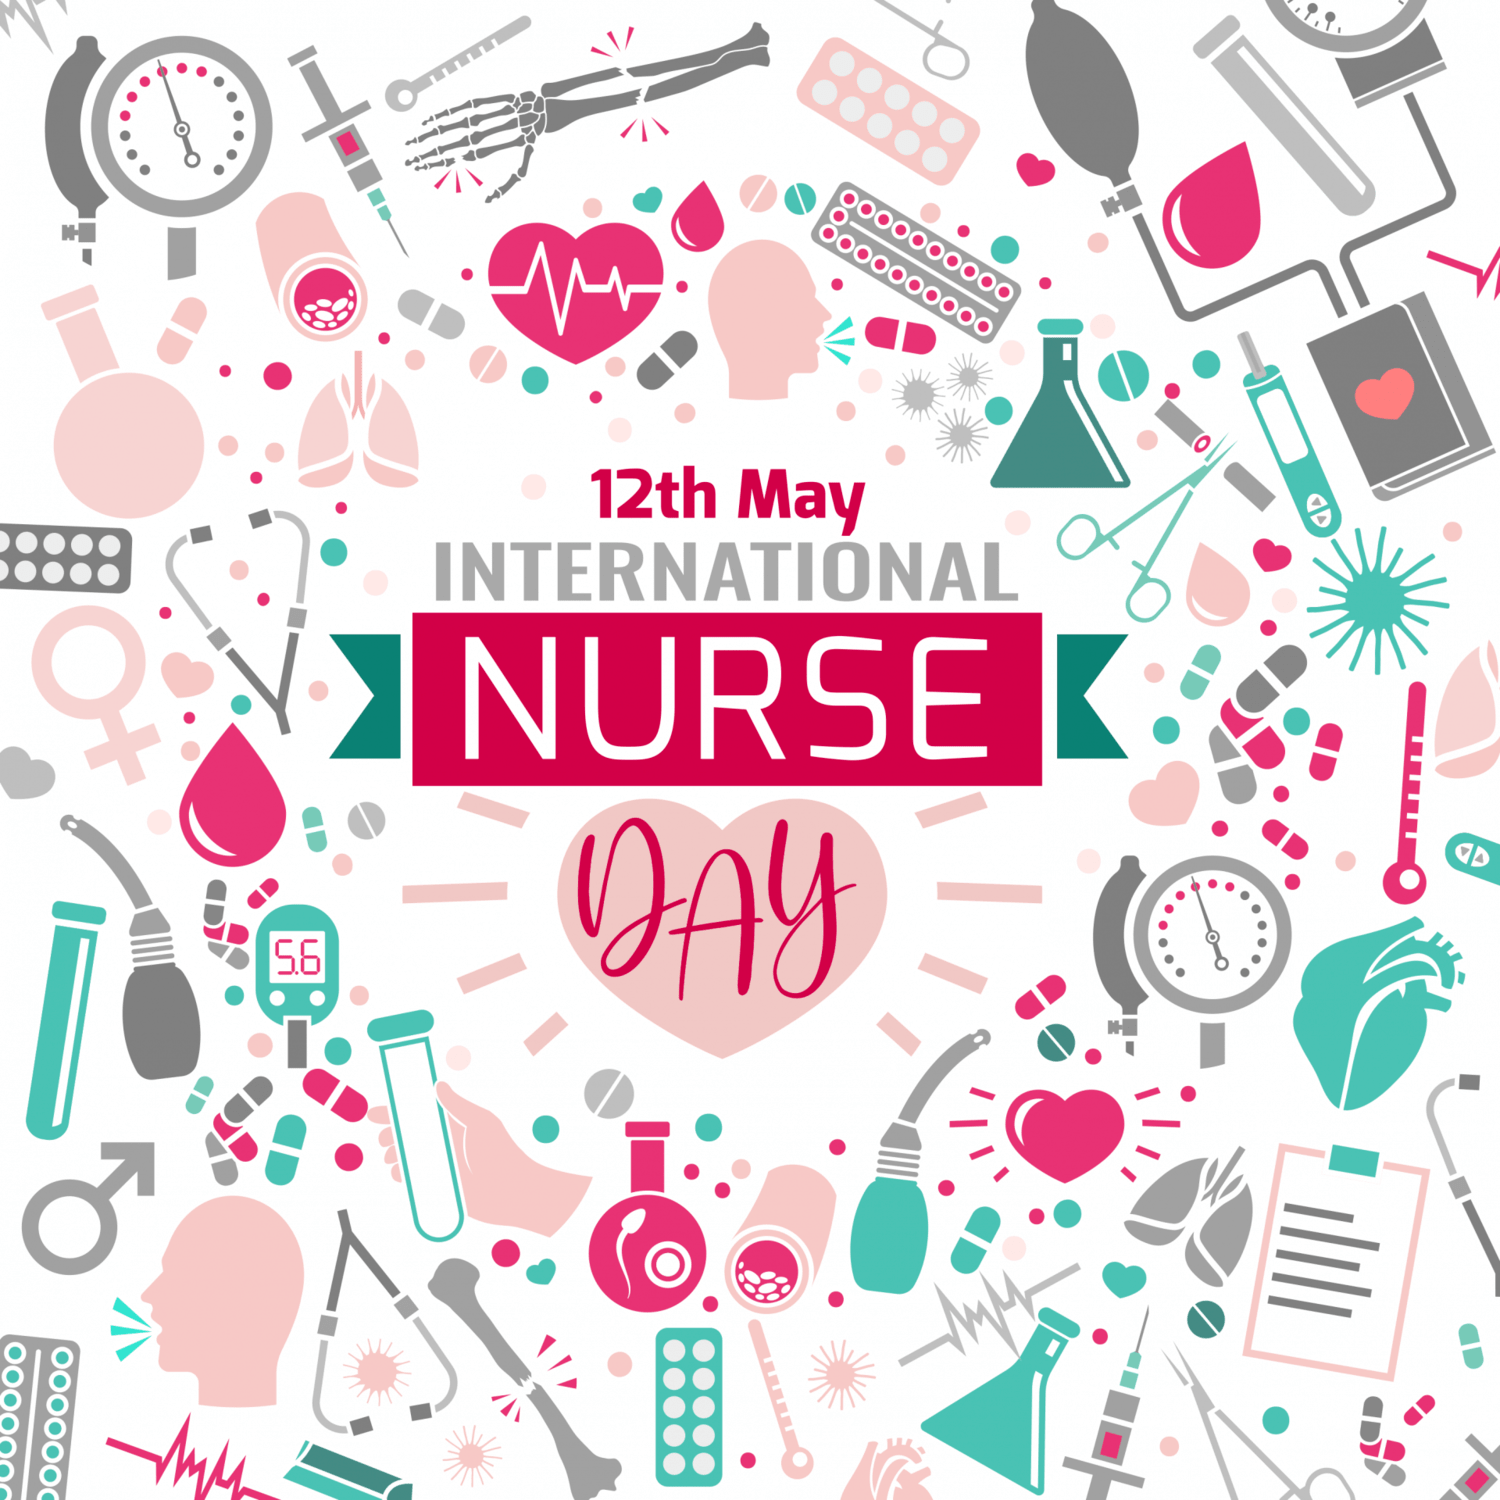 Know the history and significance of International Nurses Day 2023